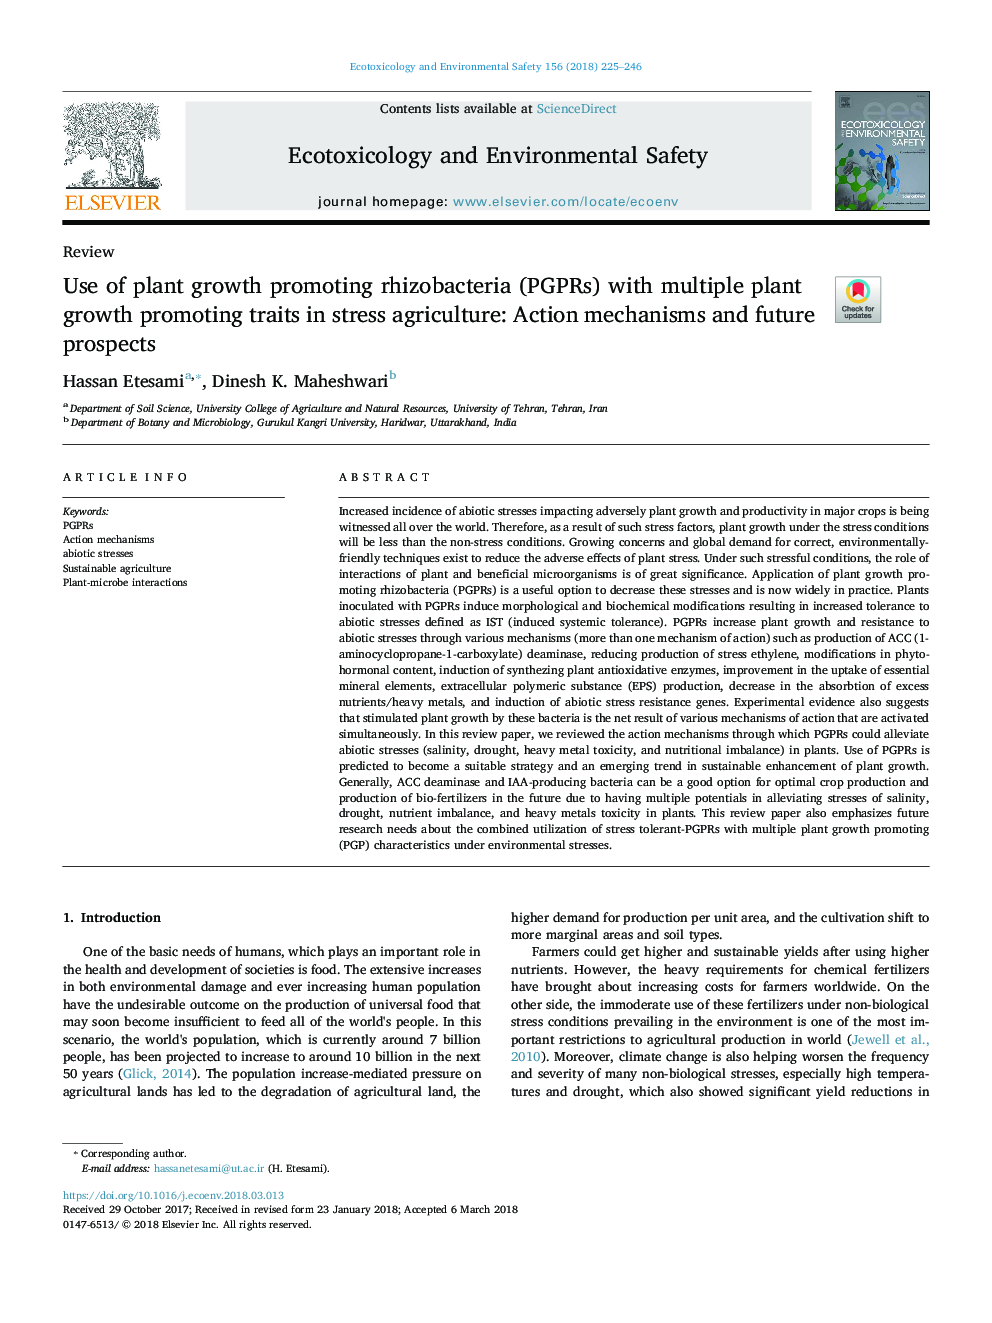 Use of plant growth promoting rhizobacteria (PGPRs) with multiple plant growth promoting traits in stress agriculture: Action mechanisms and future prospects